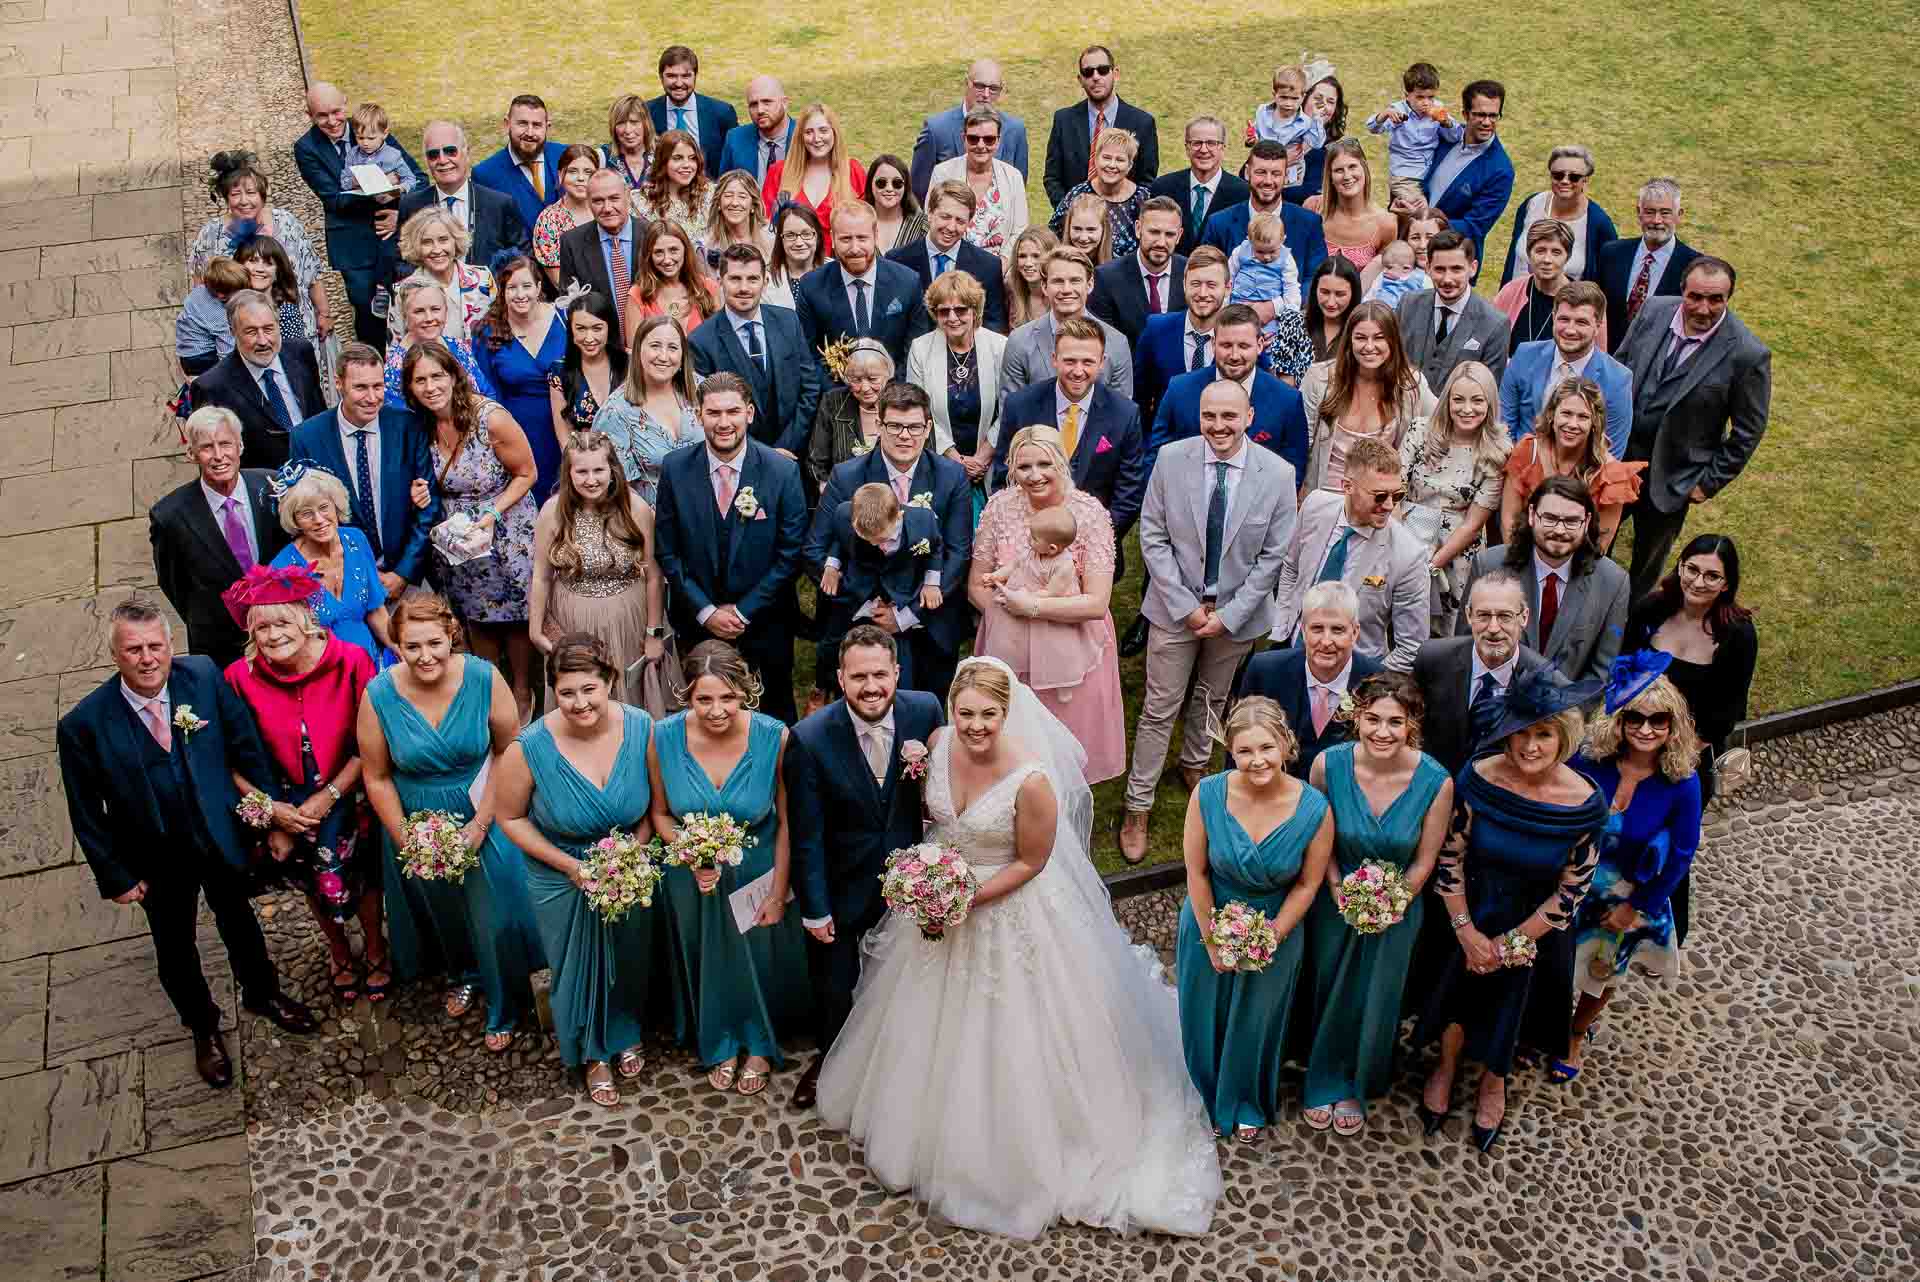 Leah and Nic and all their guests photographed from the first floor of Emmanuel College so all their faces can be seen! Photo thanks to Damien Vickers Photography. 